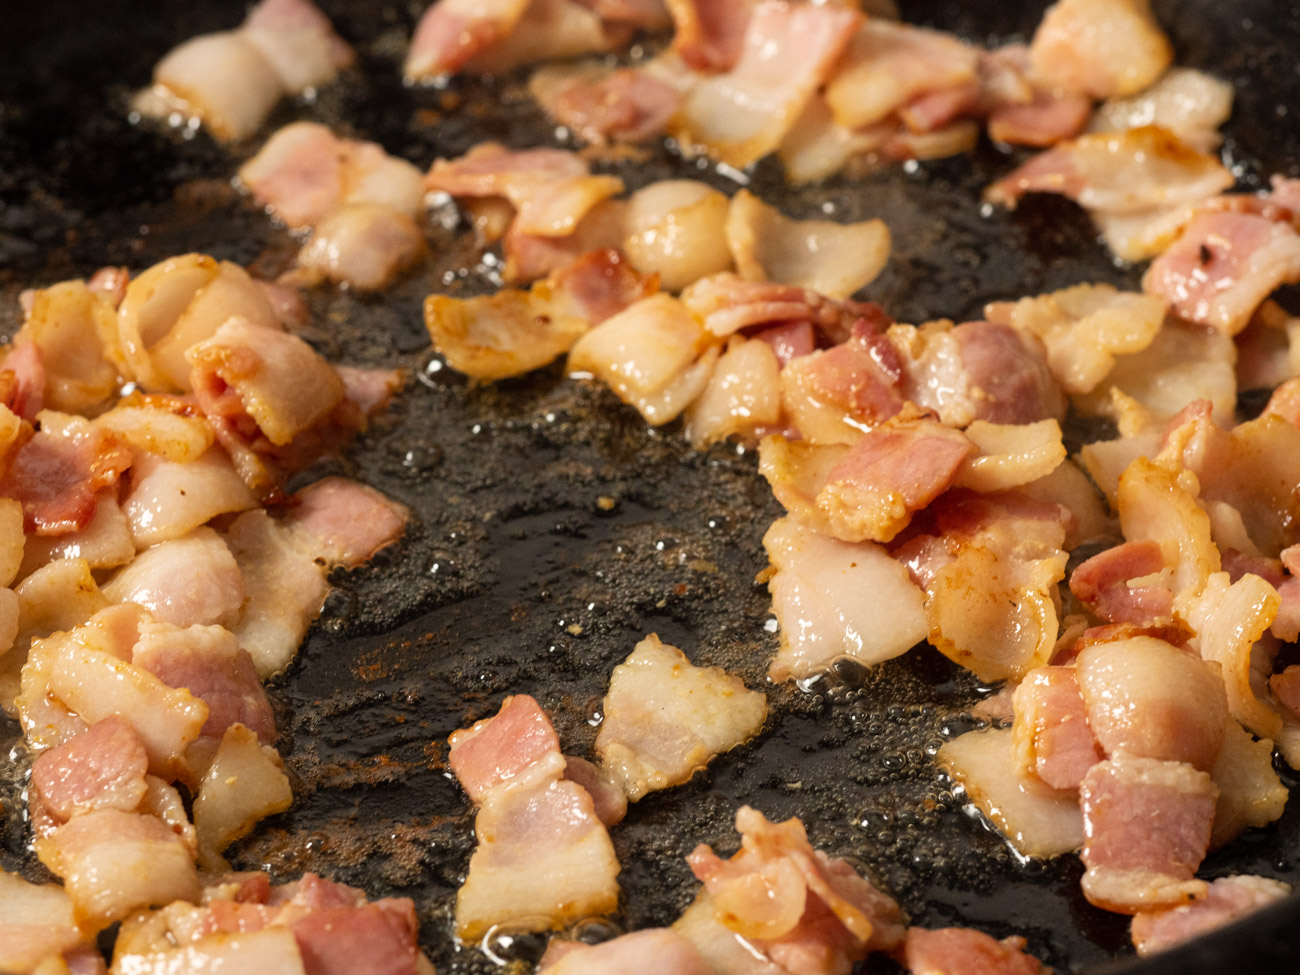 In the same pan fry the chopped bacon, and remove to a paper towel-lined plate when crispy.